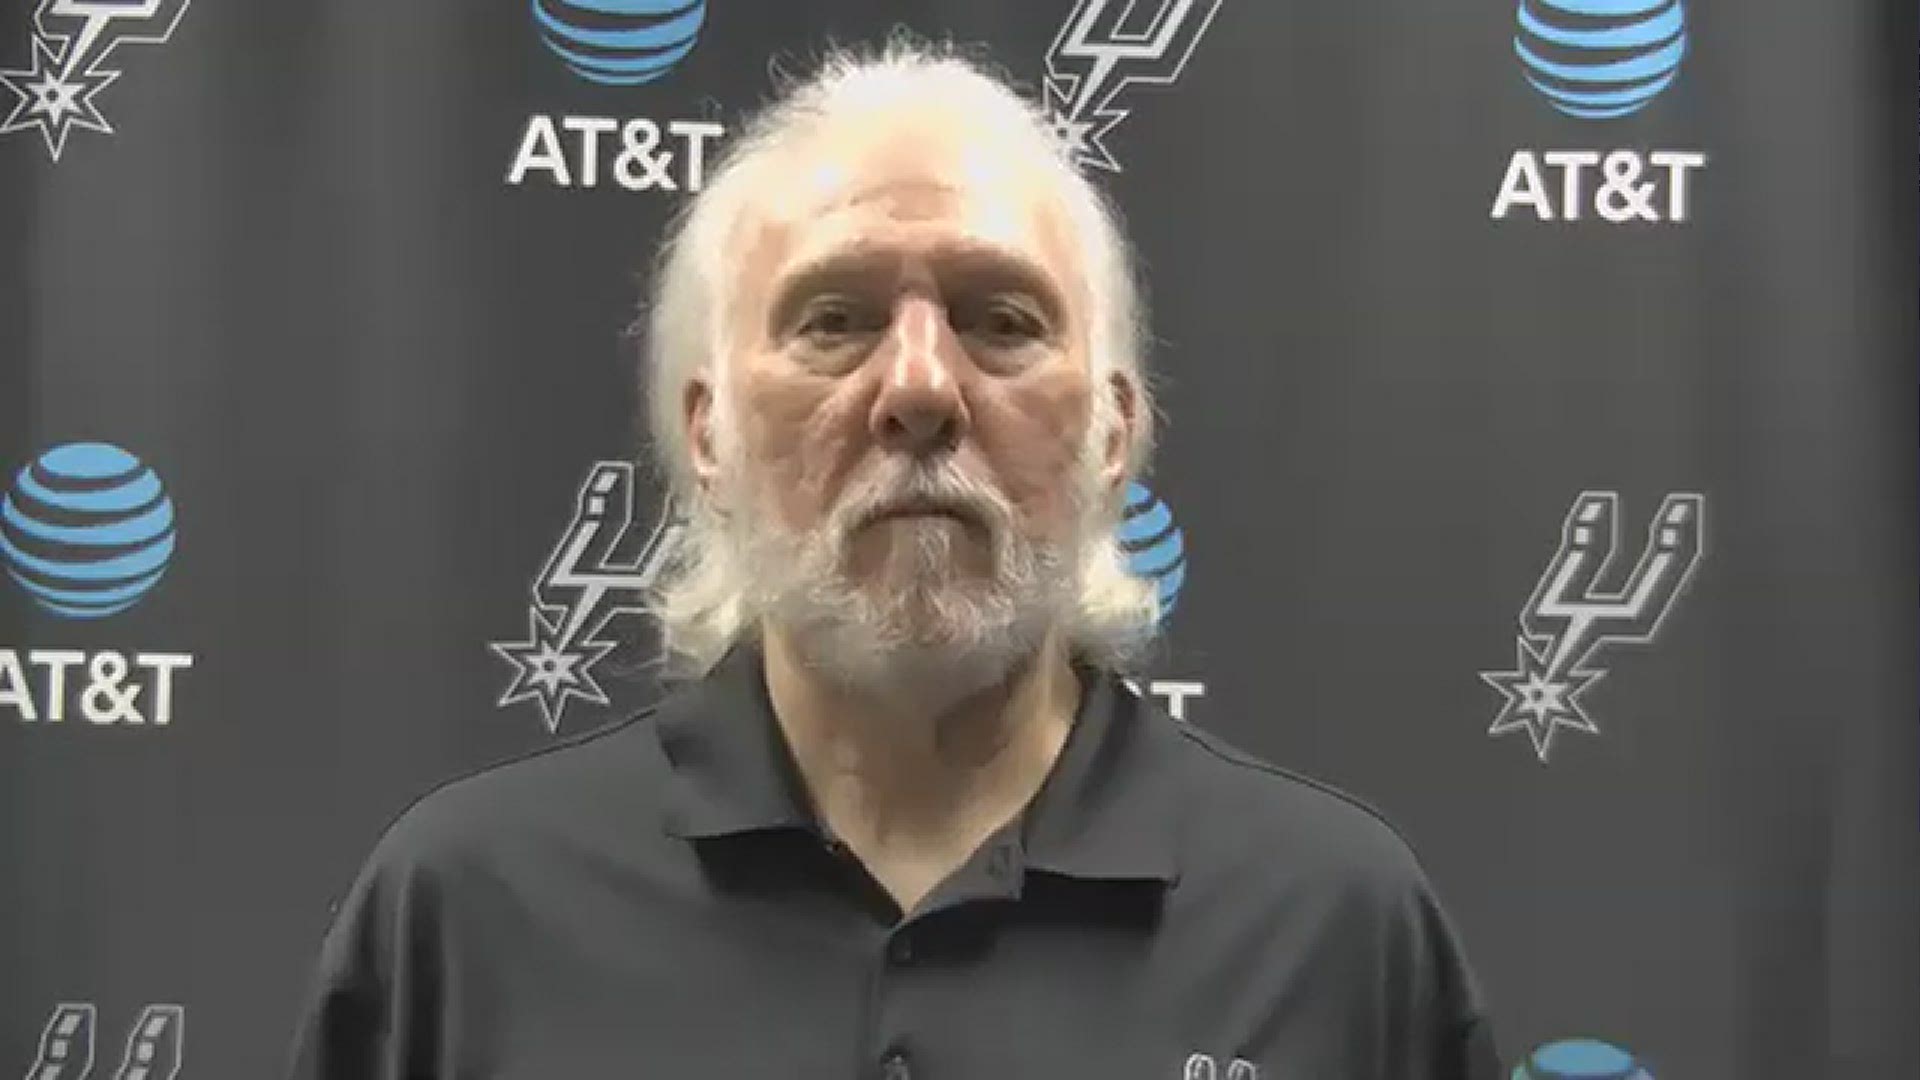 San Antonio Spurs head coach Gregg Popovich spoke to reporters ahead of the team's game against the Sacramento Kings Wednesday, March 31, 2021.